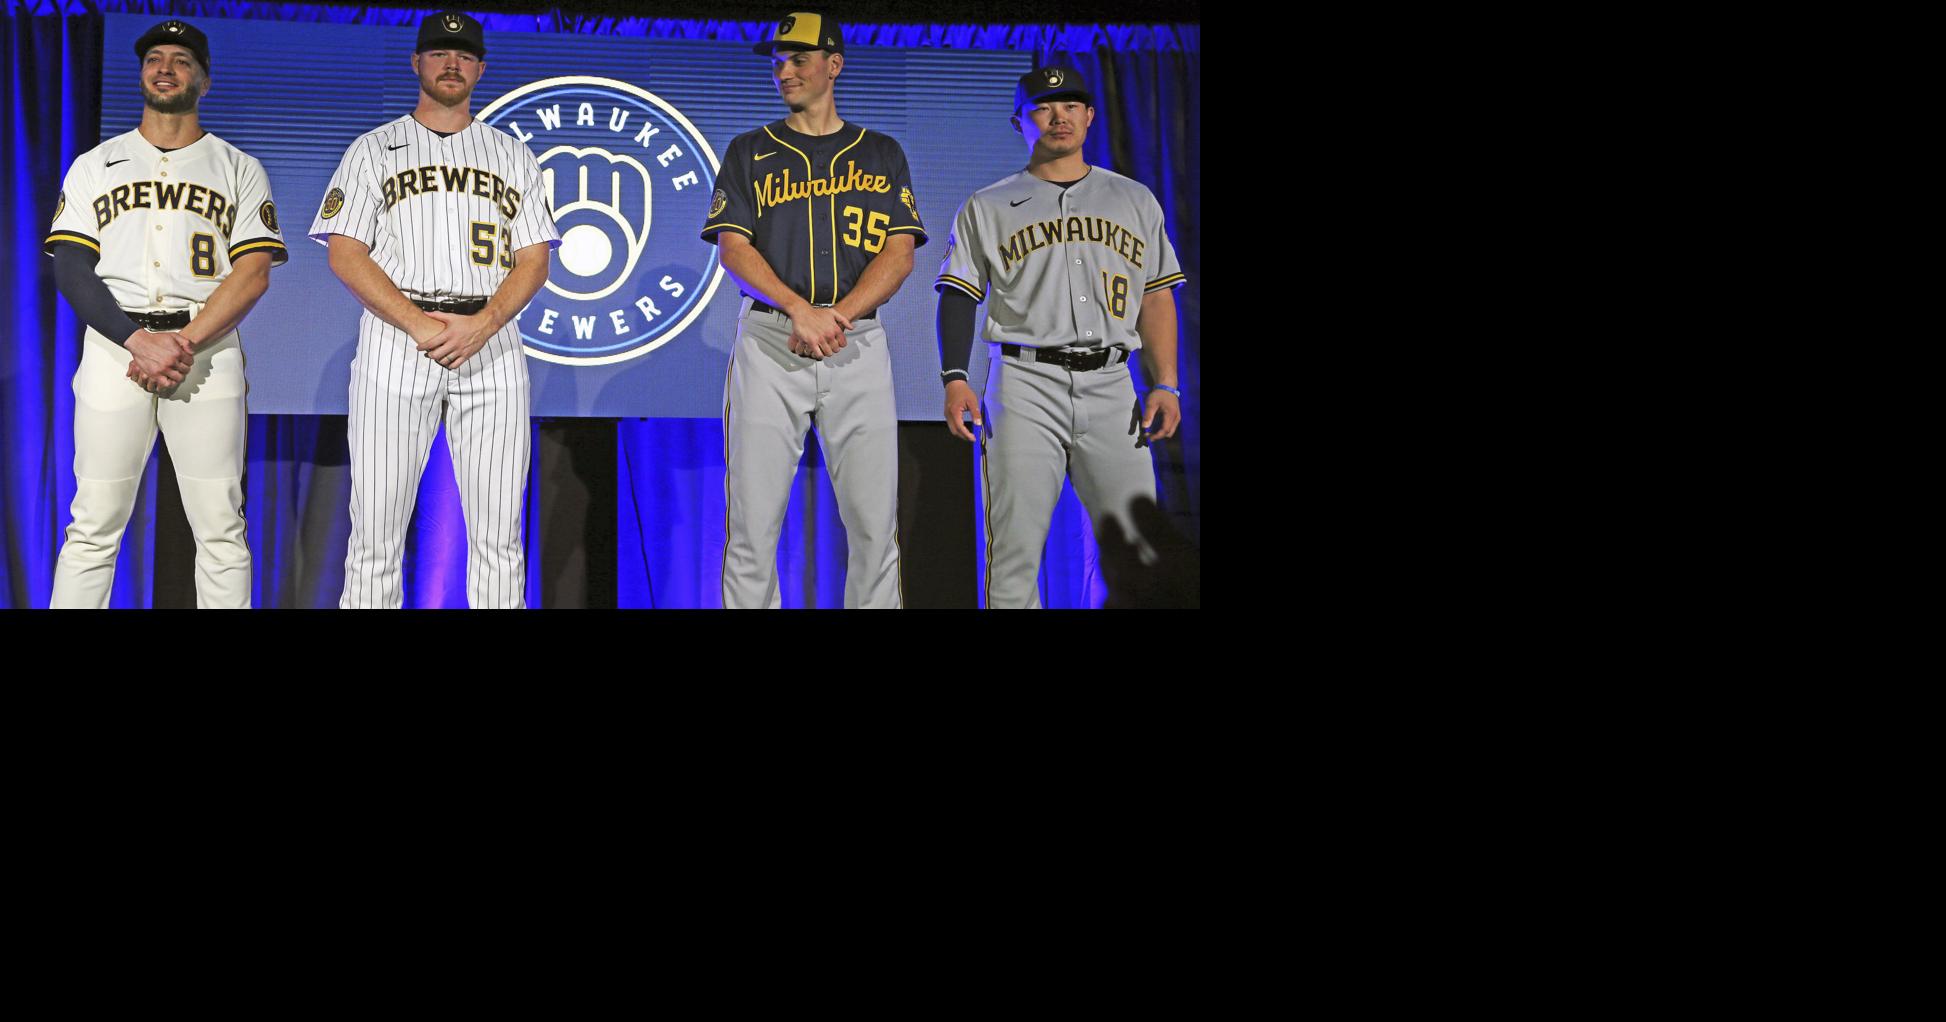 Catonsville resident among finalists in Milwaukee Brewers uniform